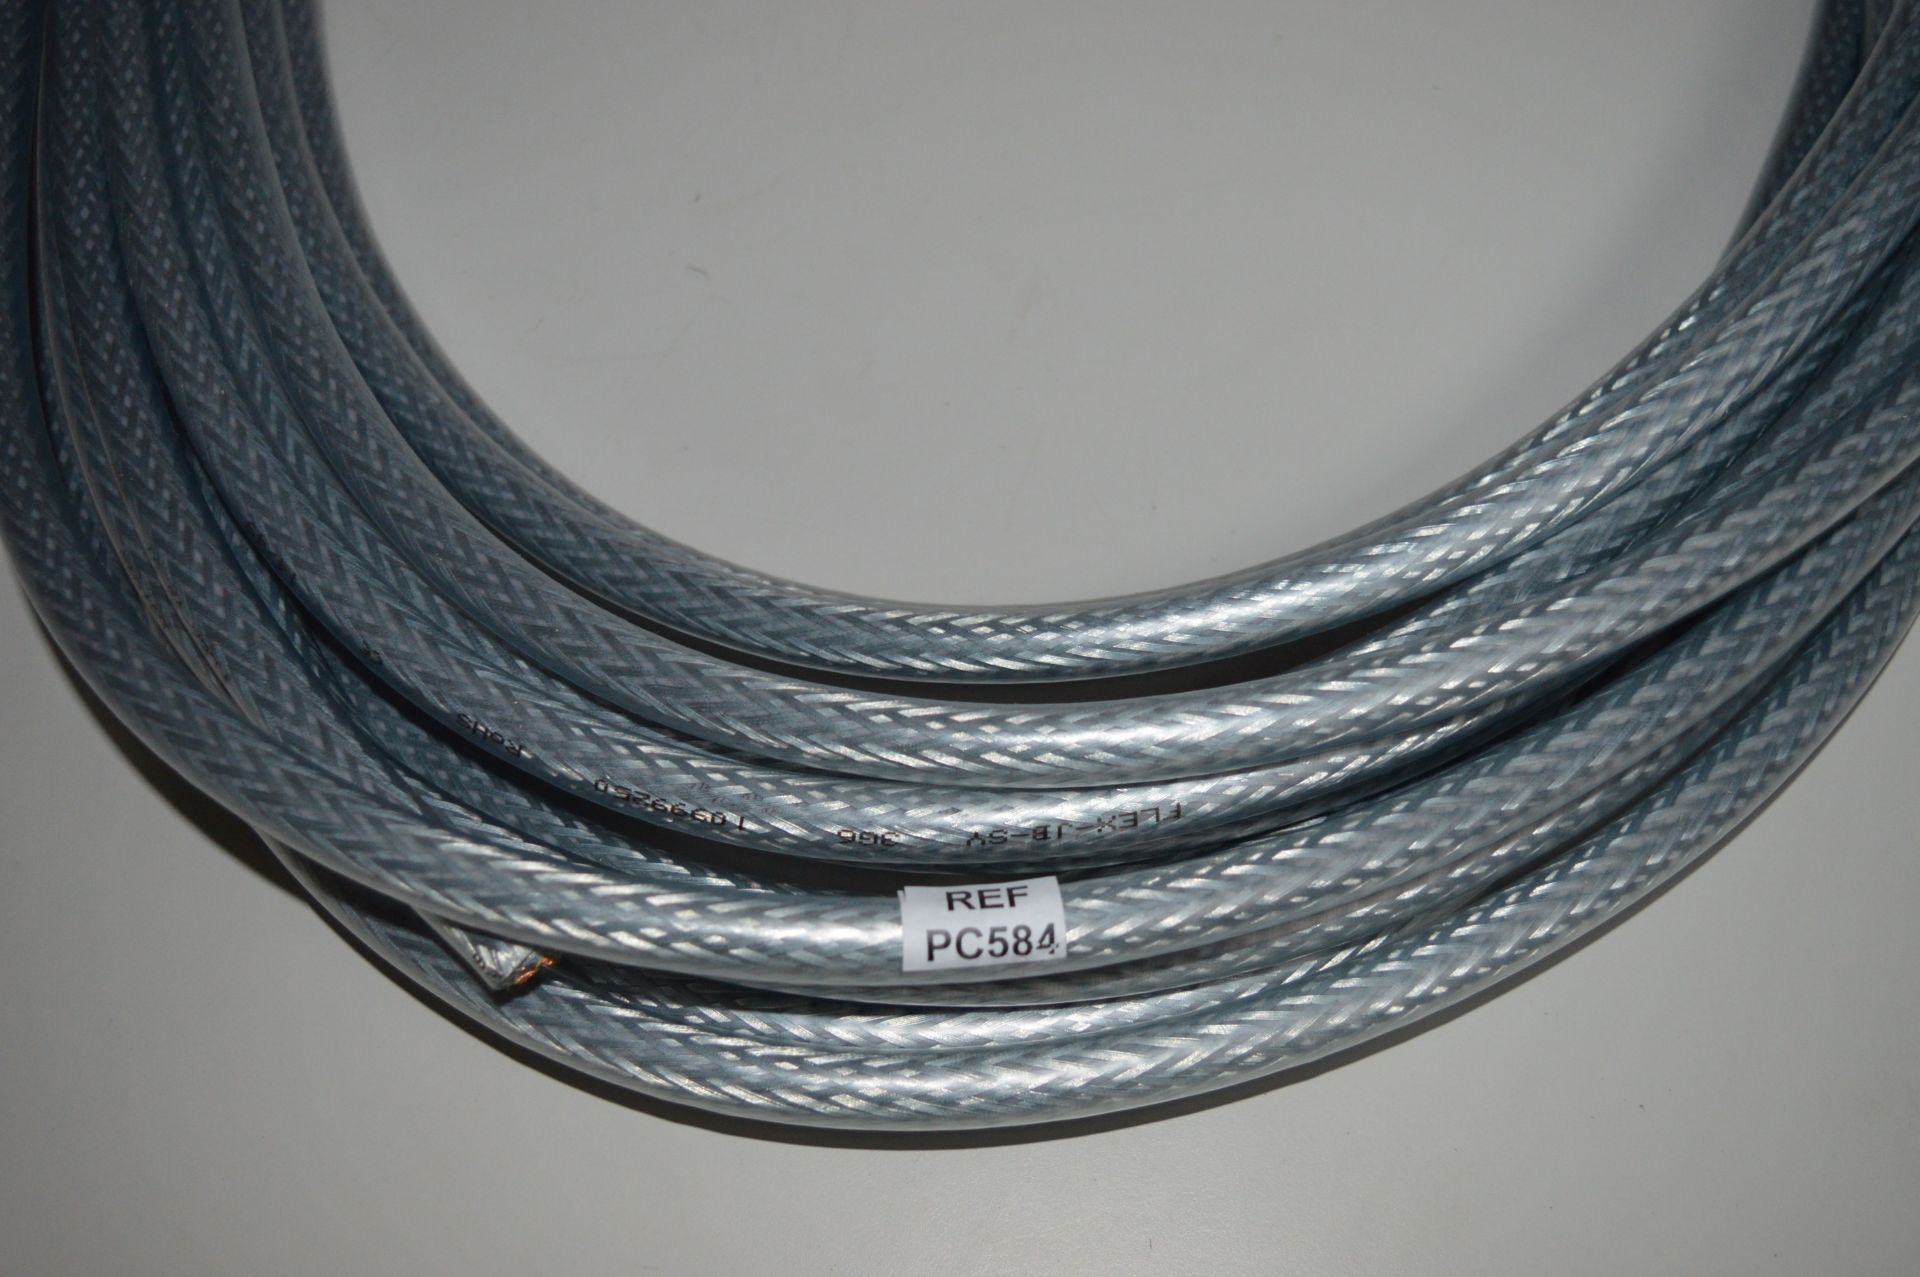 20 x Meters of Braided SY 3 Core 6.0mm Colour Coded Electric Cable - Unused - CL300 - Ref PC584 - - Image 4 of 4